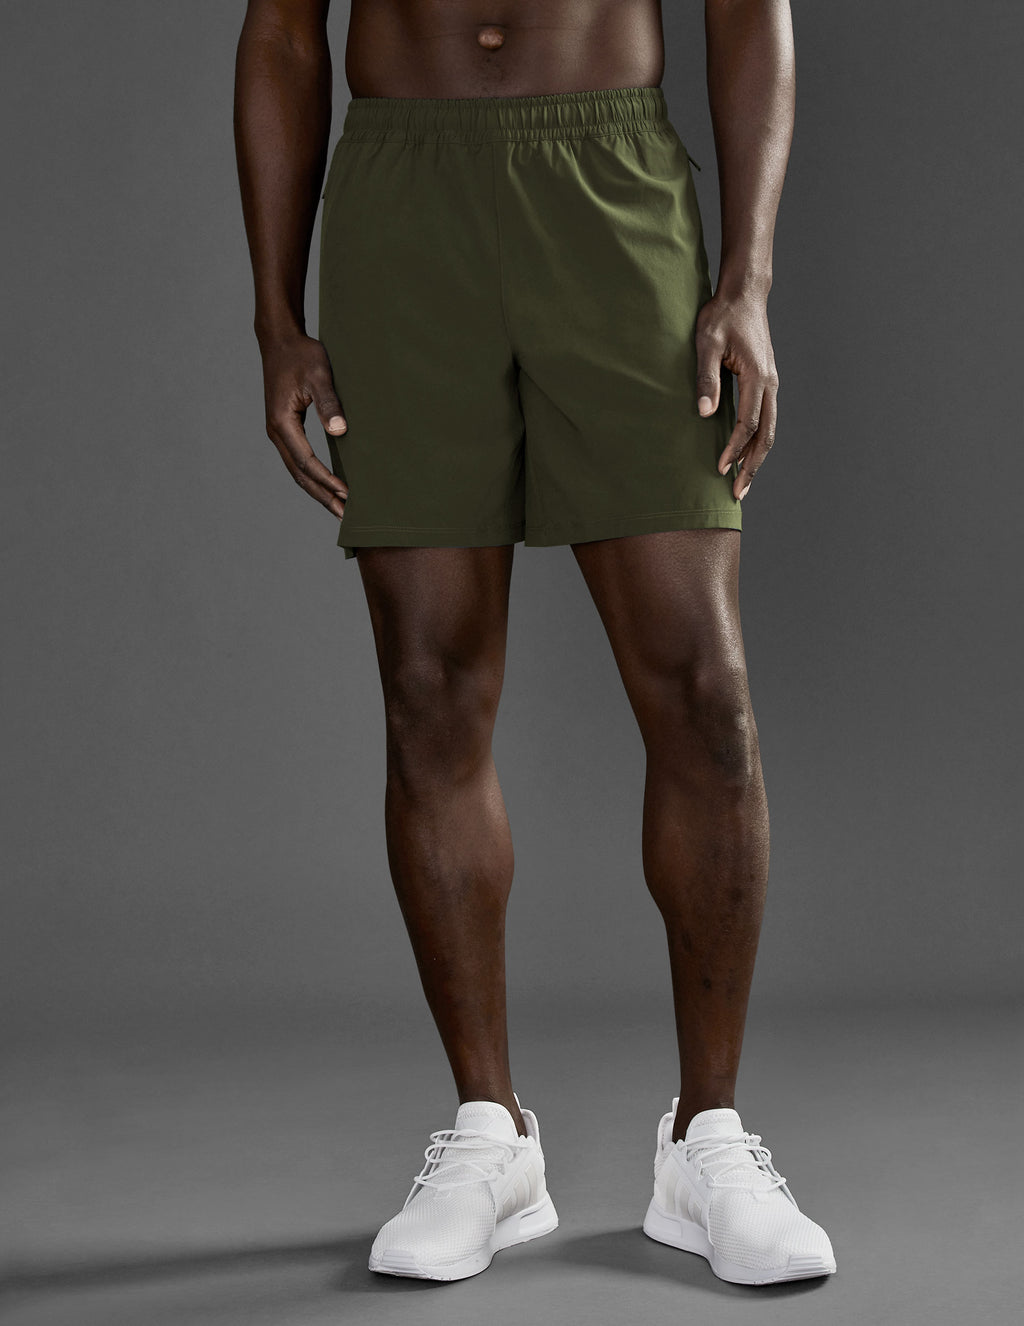 Pivotal Men's Performance Lined Short Featured Image